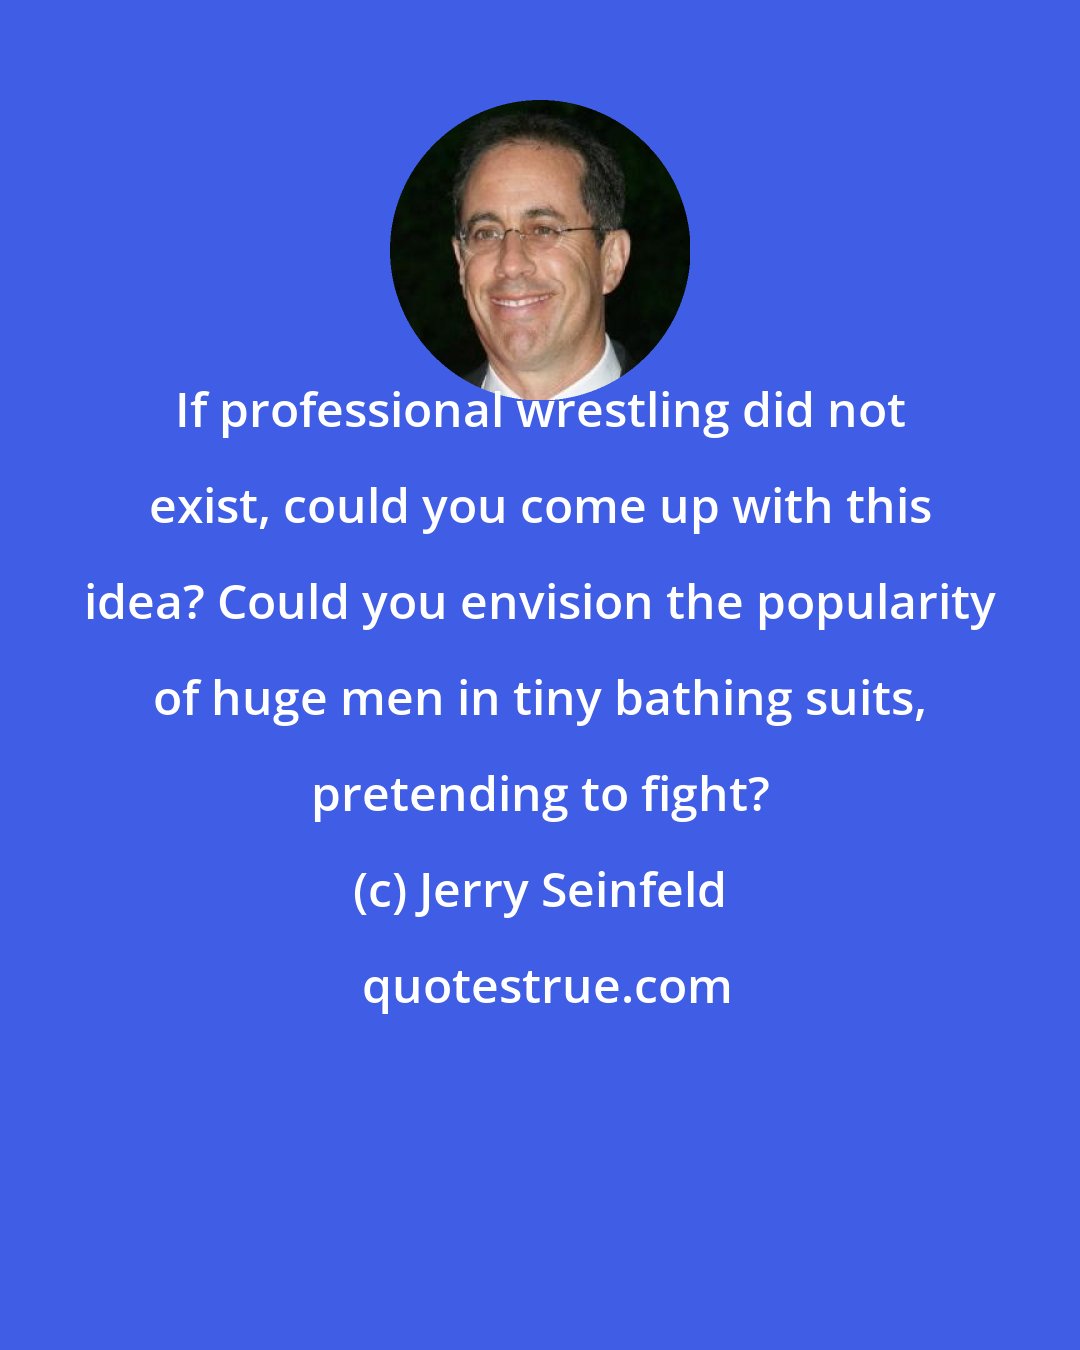 Jerry Seinfeld: If professional wrestling did not exist, could you come up with this idea? Could you envision the popularity of huge men in tiny bathing suits, pretending to fight?